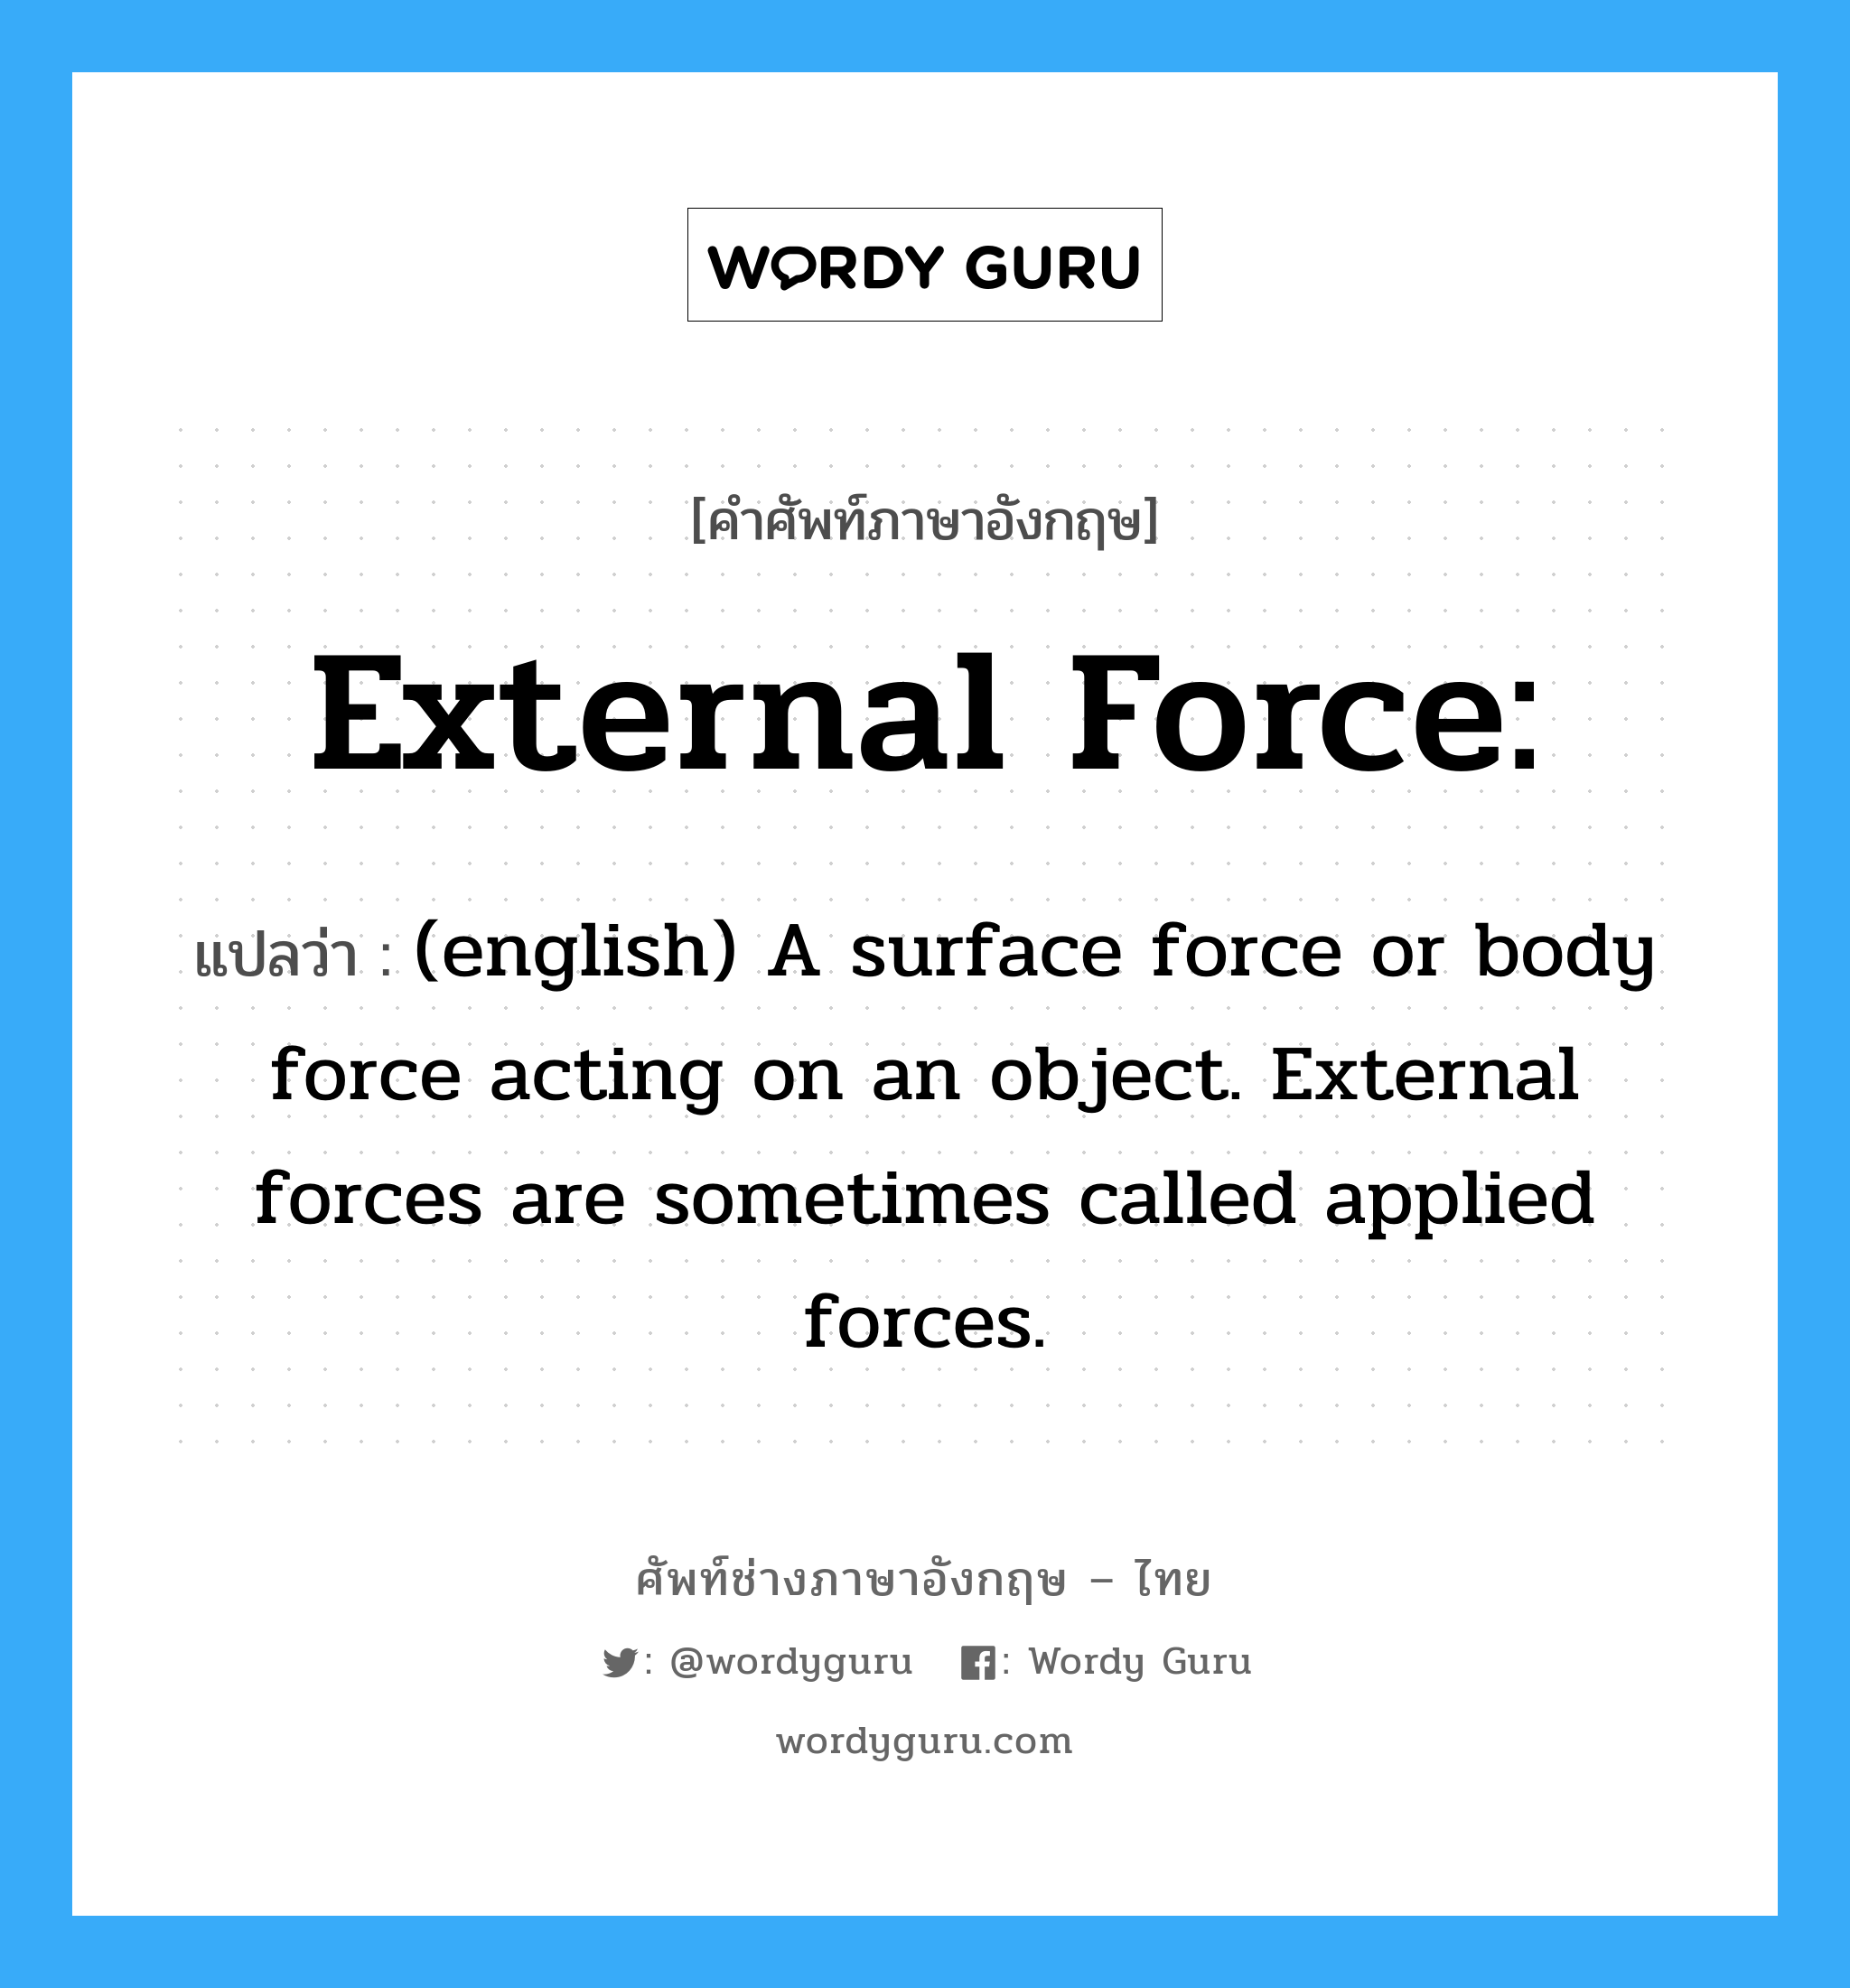 External force: แปลว่า?, คำศัพท์ช่างภาษาอังกฤษ - ไทย External force: คำศัพท์ภาษาอังกฤษ External force: แปลว่า (english) A surface force or body force acting on an object. External forces are sometimes called applied forces.